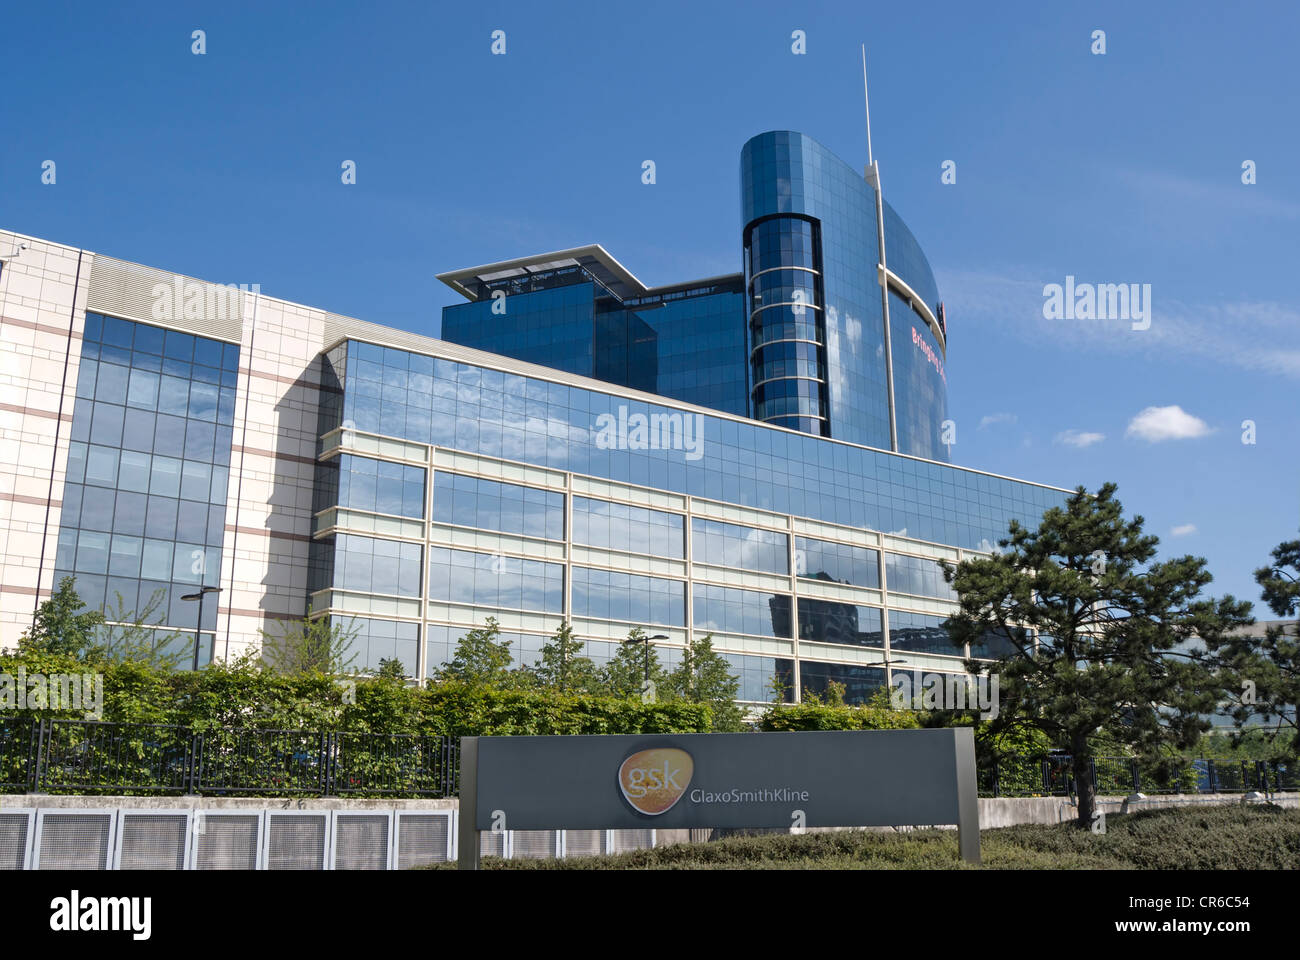 headquarters of gsk, glaxo smith kline, on the great west road, brentford, west london, england Stock Photo